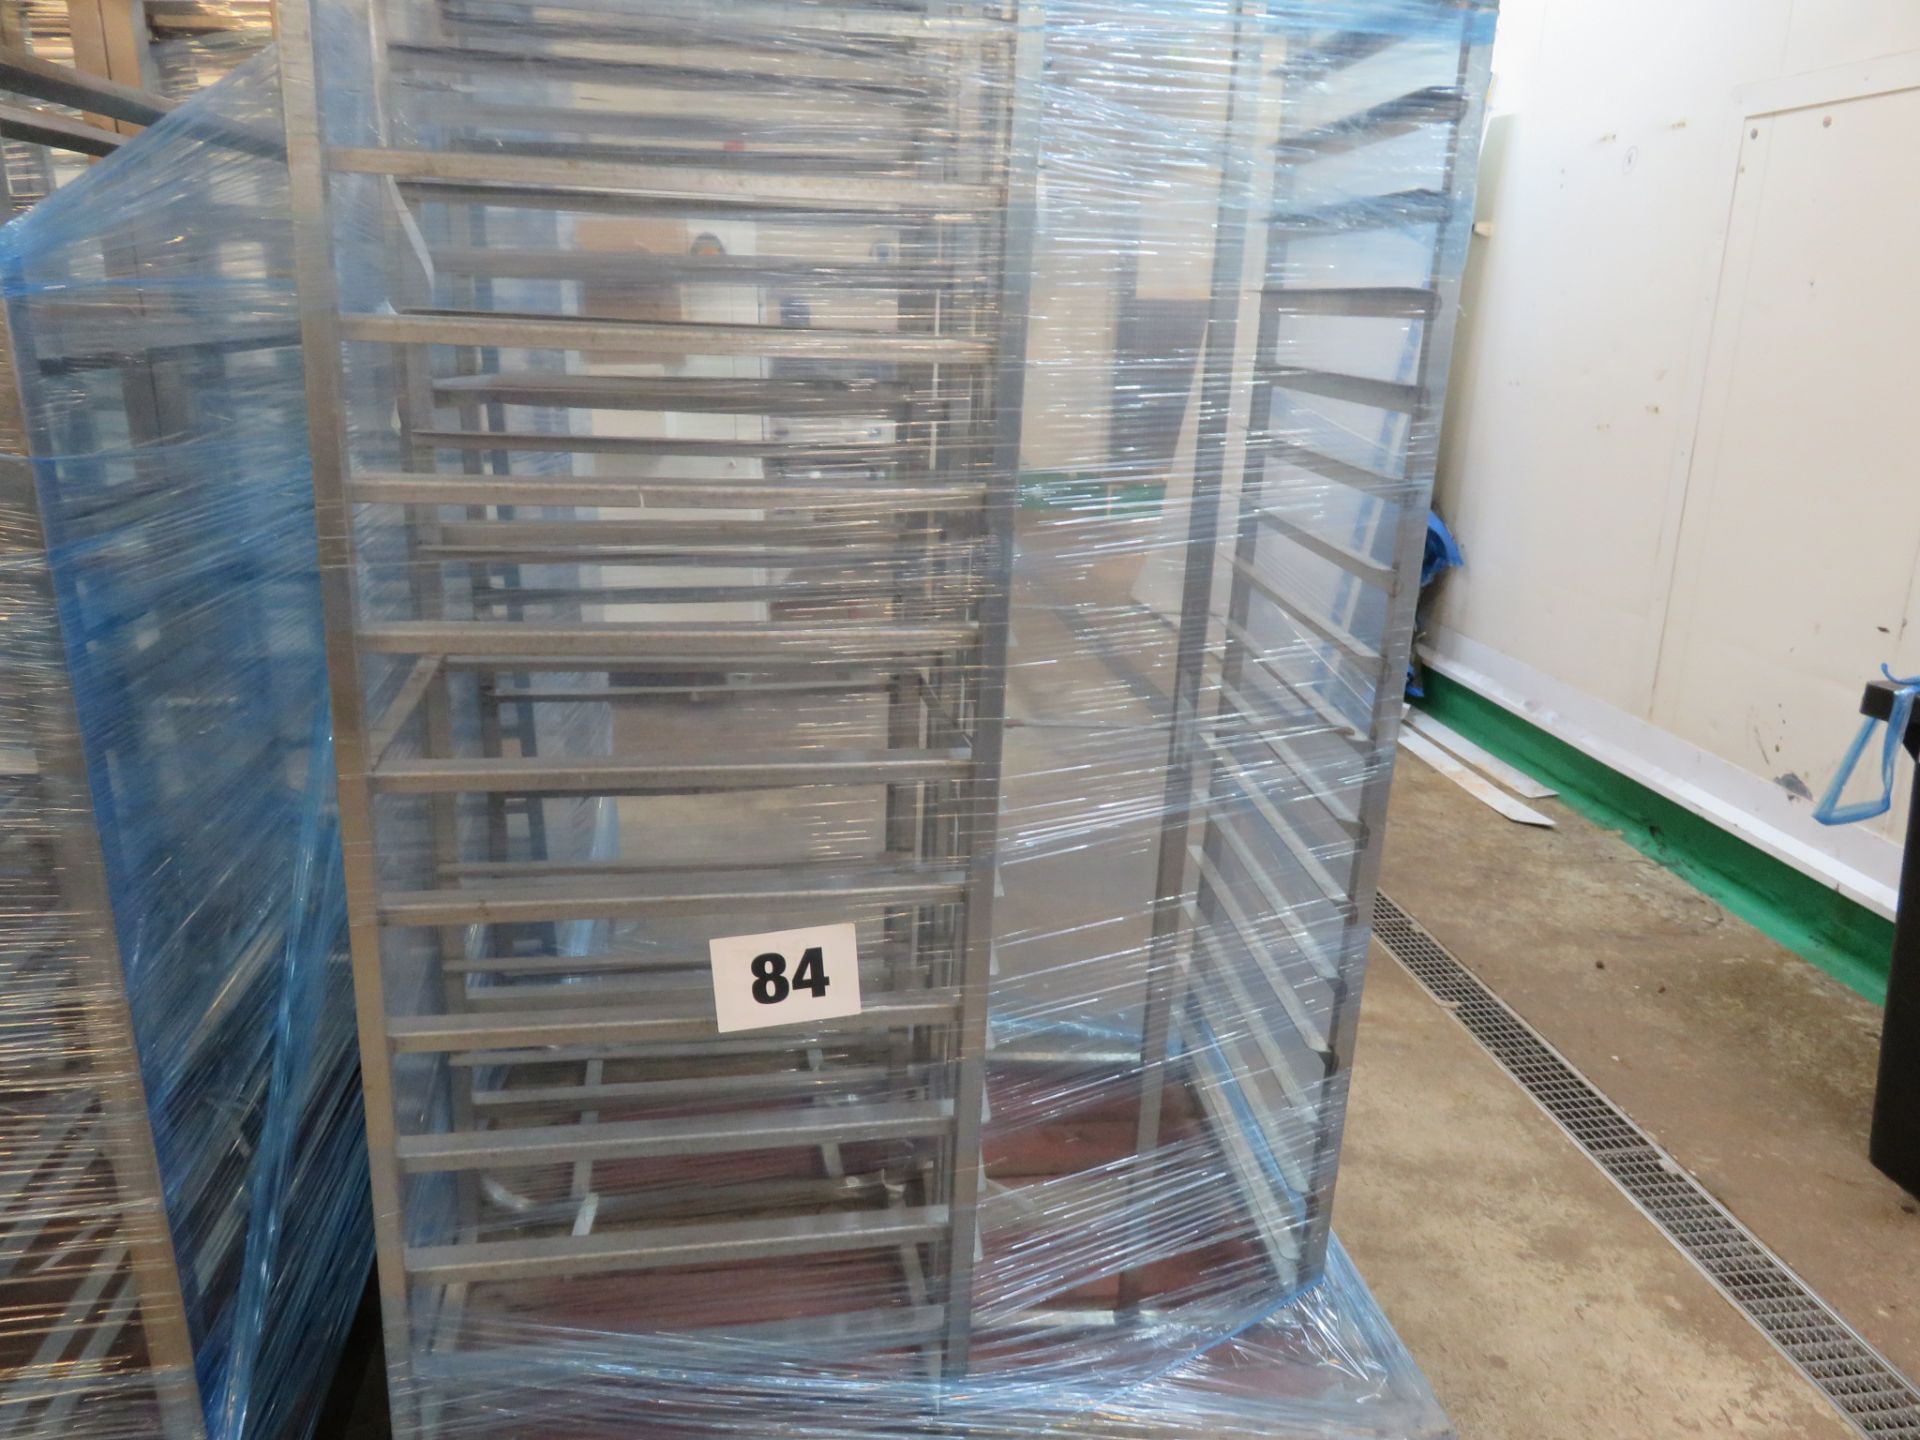 3 x Mobile S/s Racks capable of holding 16 trays. Lift out £20